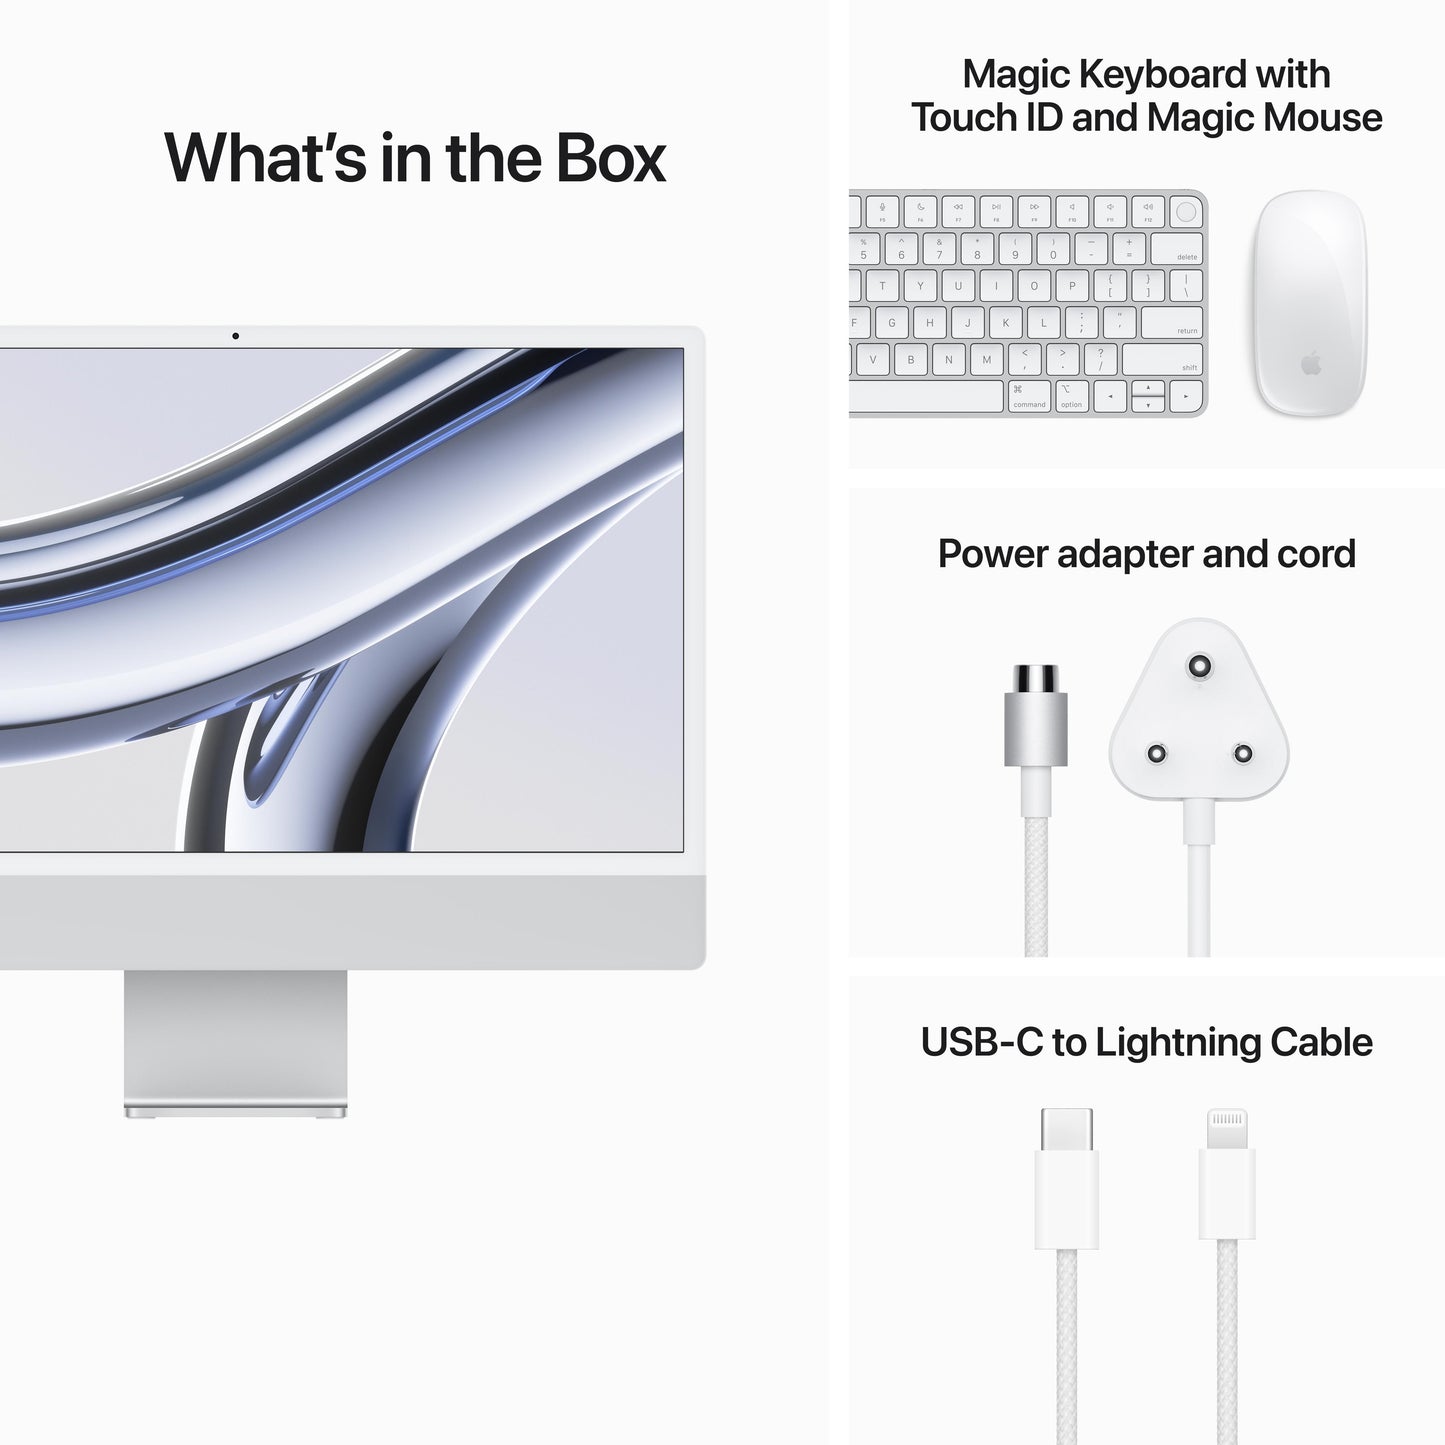 24-inch iMac with Retina 4.5K display: Apple M3 chip with 8‑core CPU and 10‑core GPU, 512GB SSD - Silver